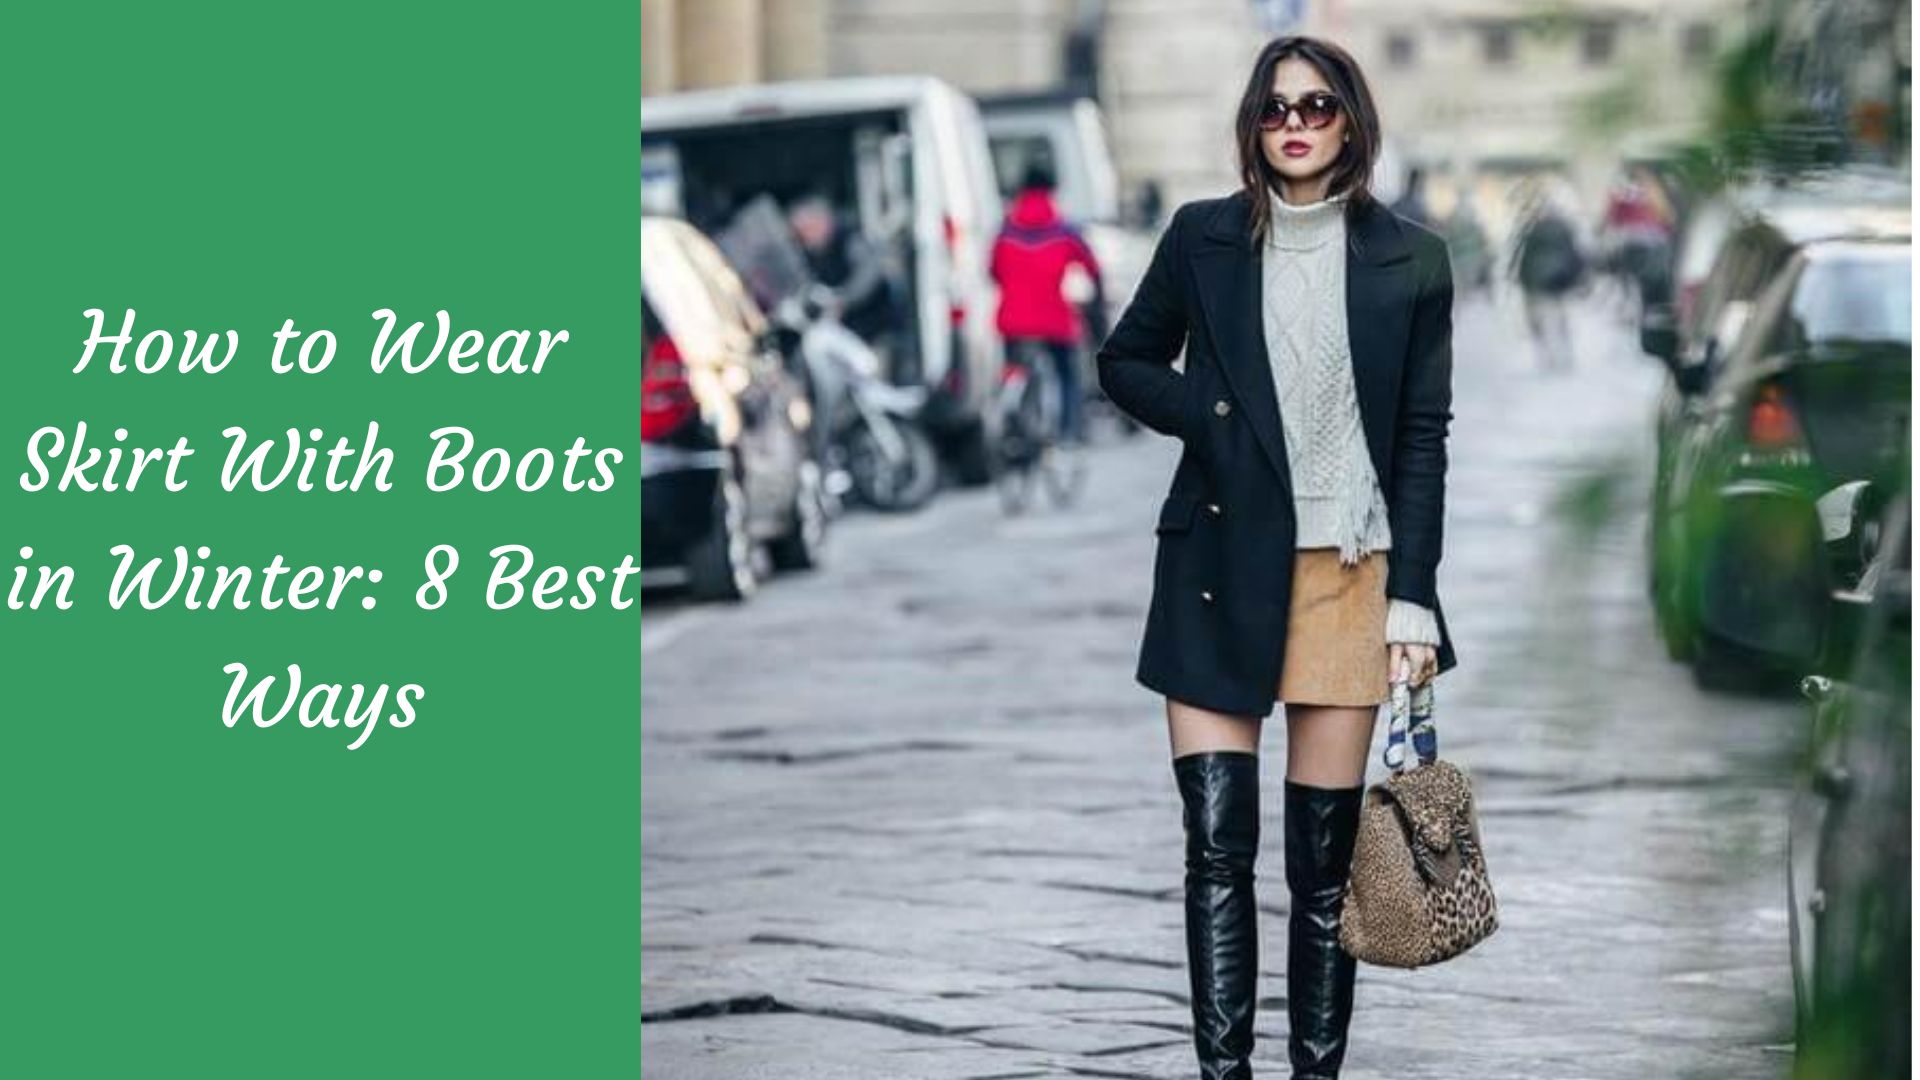 How to Wear Skirt With Boots in Winter: 8 Best Ways - The Kosha